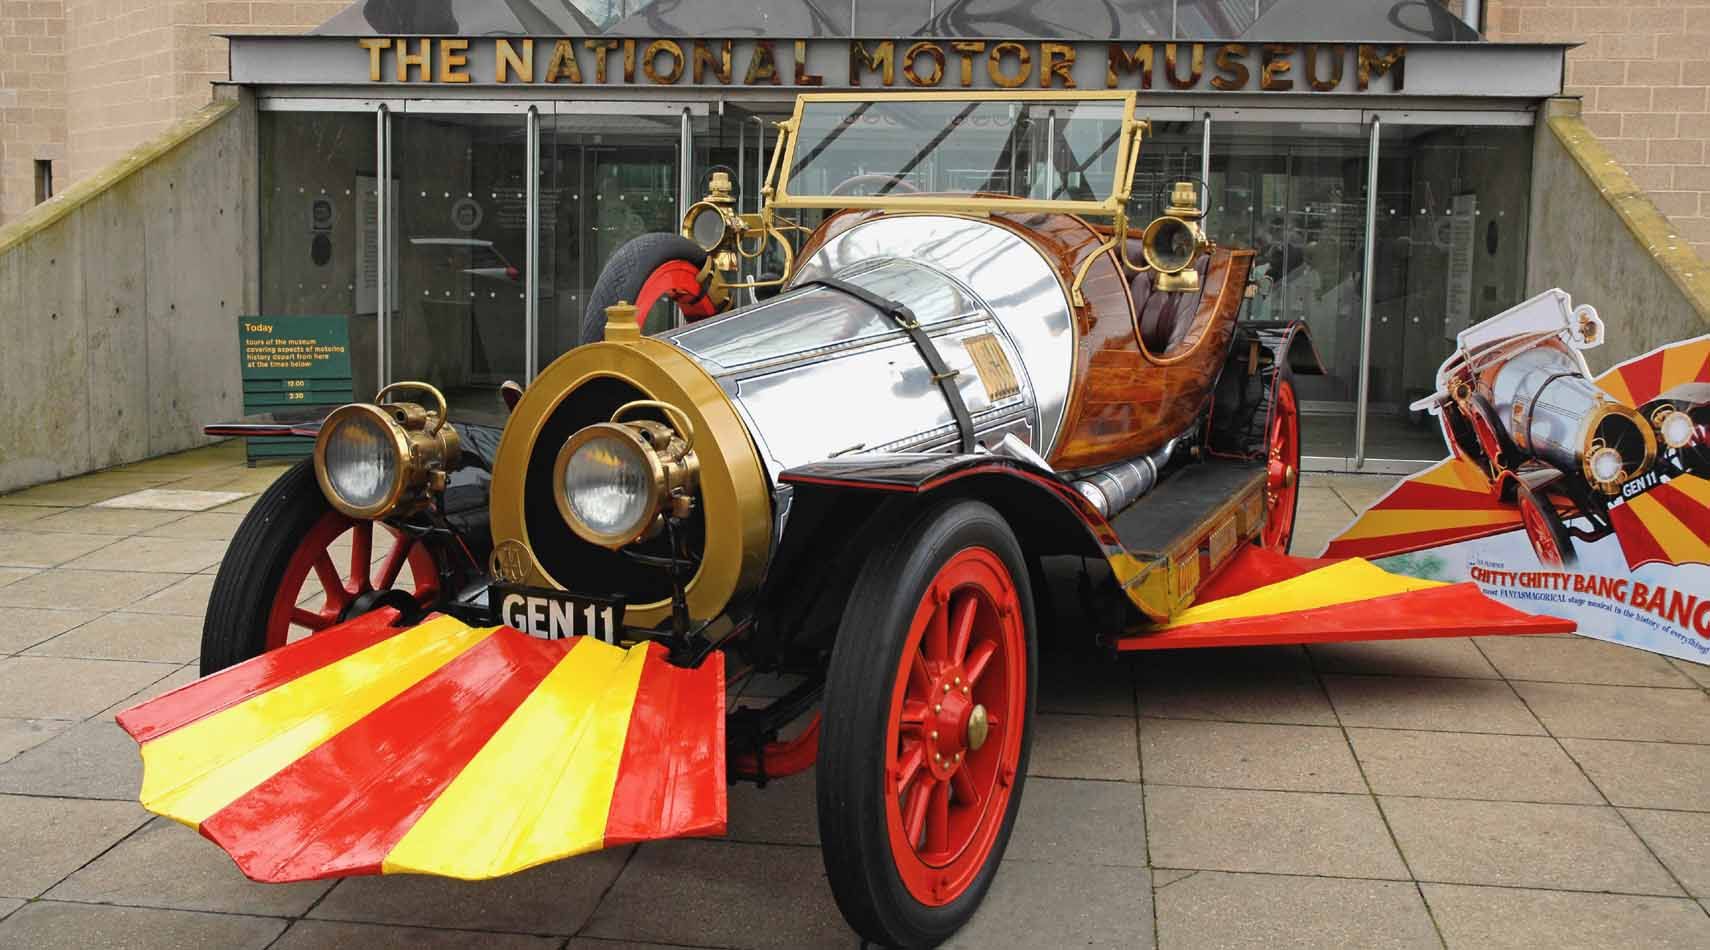 Some Six Chitty Chitty Bang Bang Cars Were Made For The Movie, Although There Was Only One That Actually Worked And Was Driven In The Movie By Dick Van Dyke, The Man Who Plays Caractacus Potts